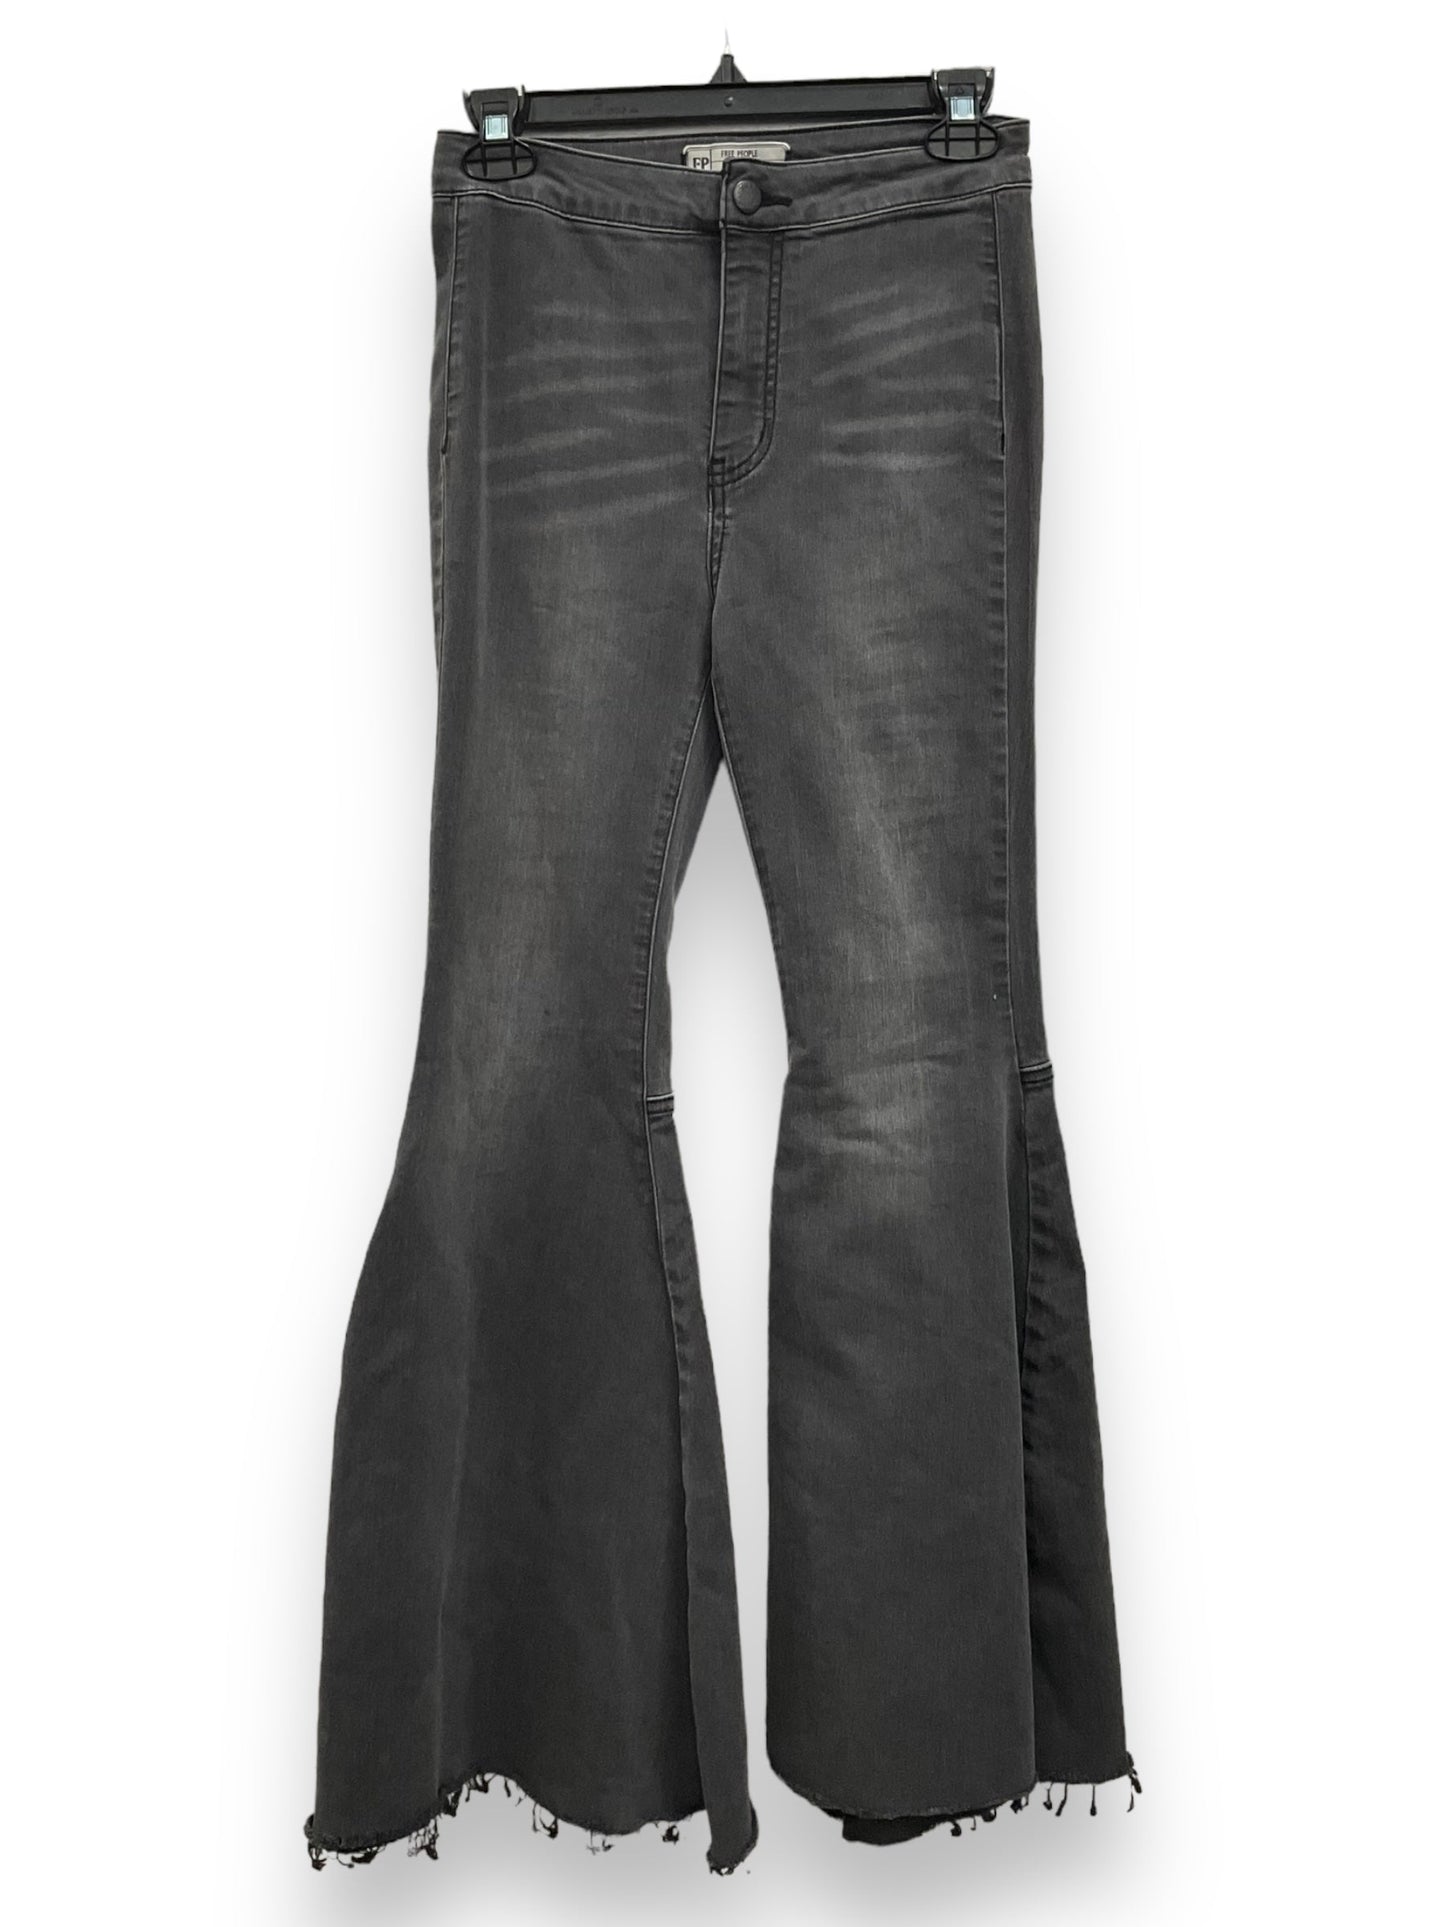 Black Jeans Flared Free People, Size 2